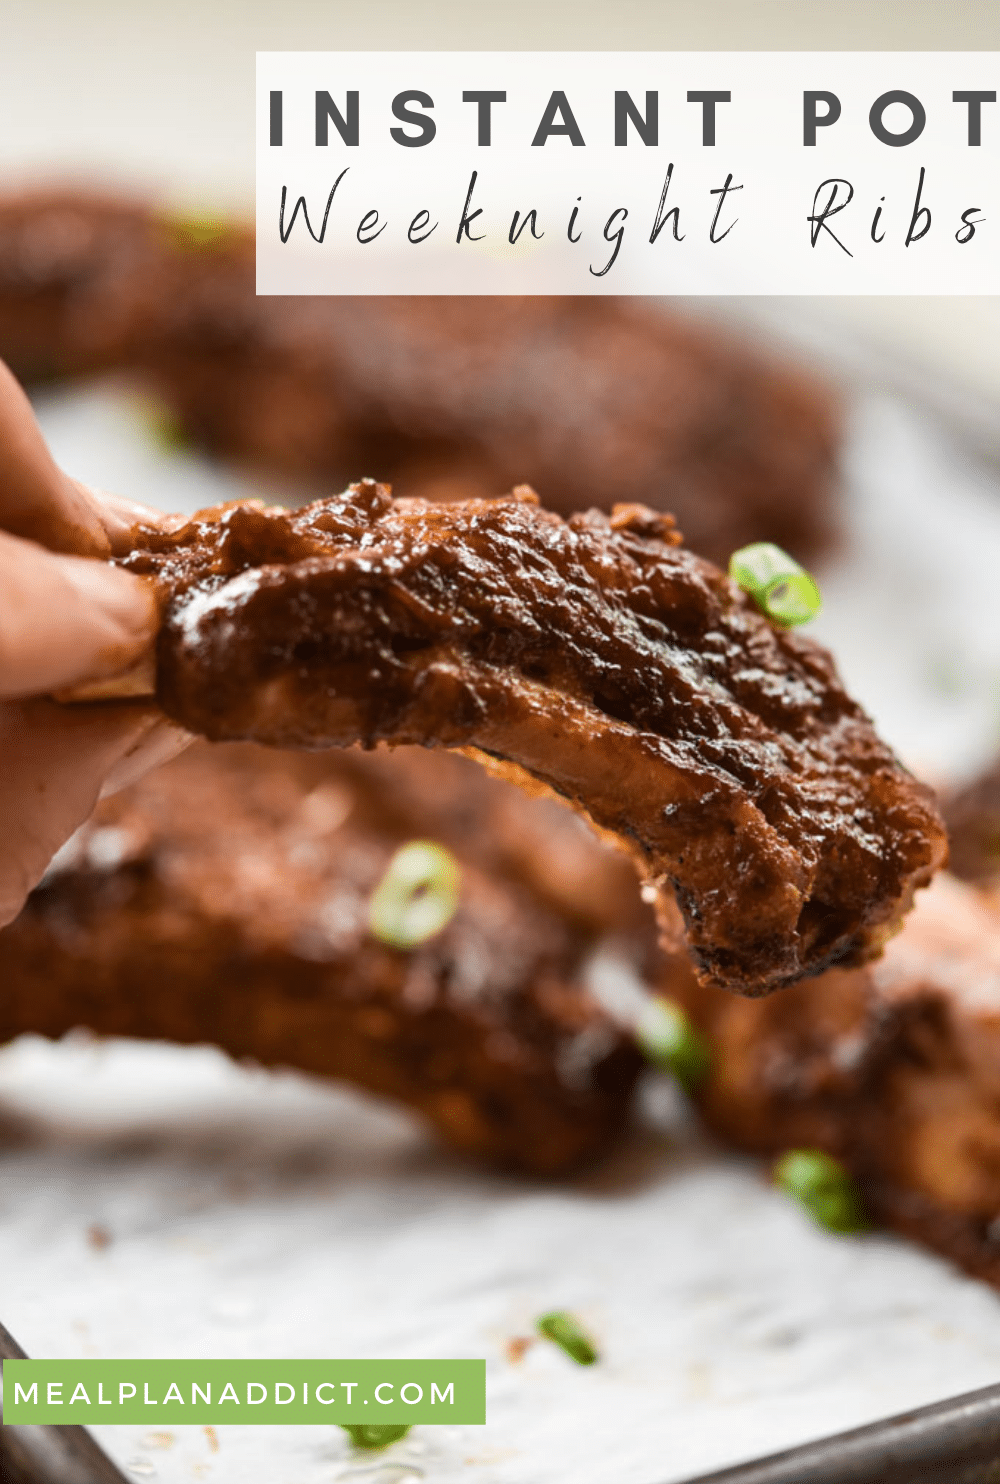 How to Make Instant Pot Weeknight Ribs | Meal Plan Addict